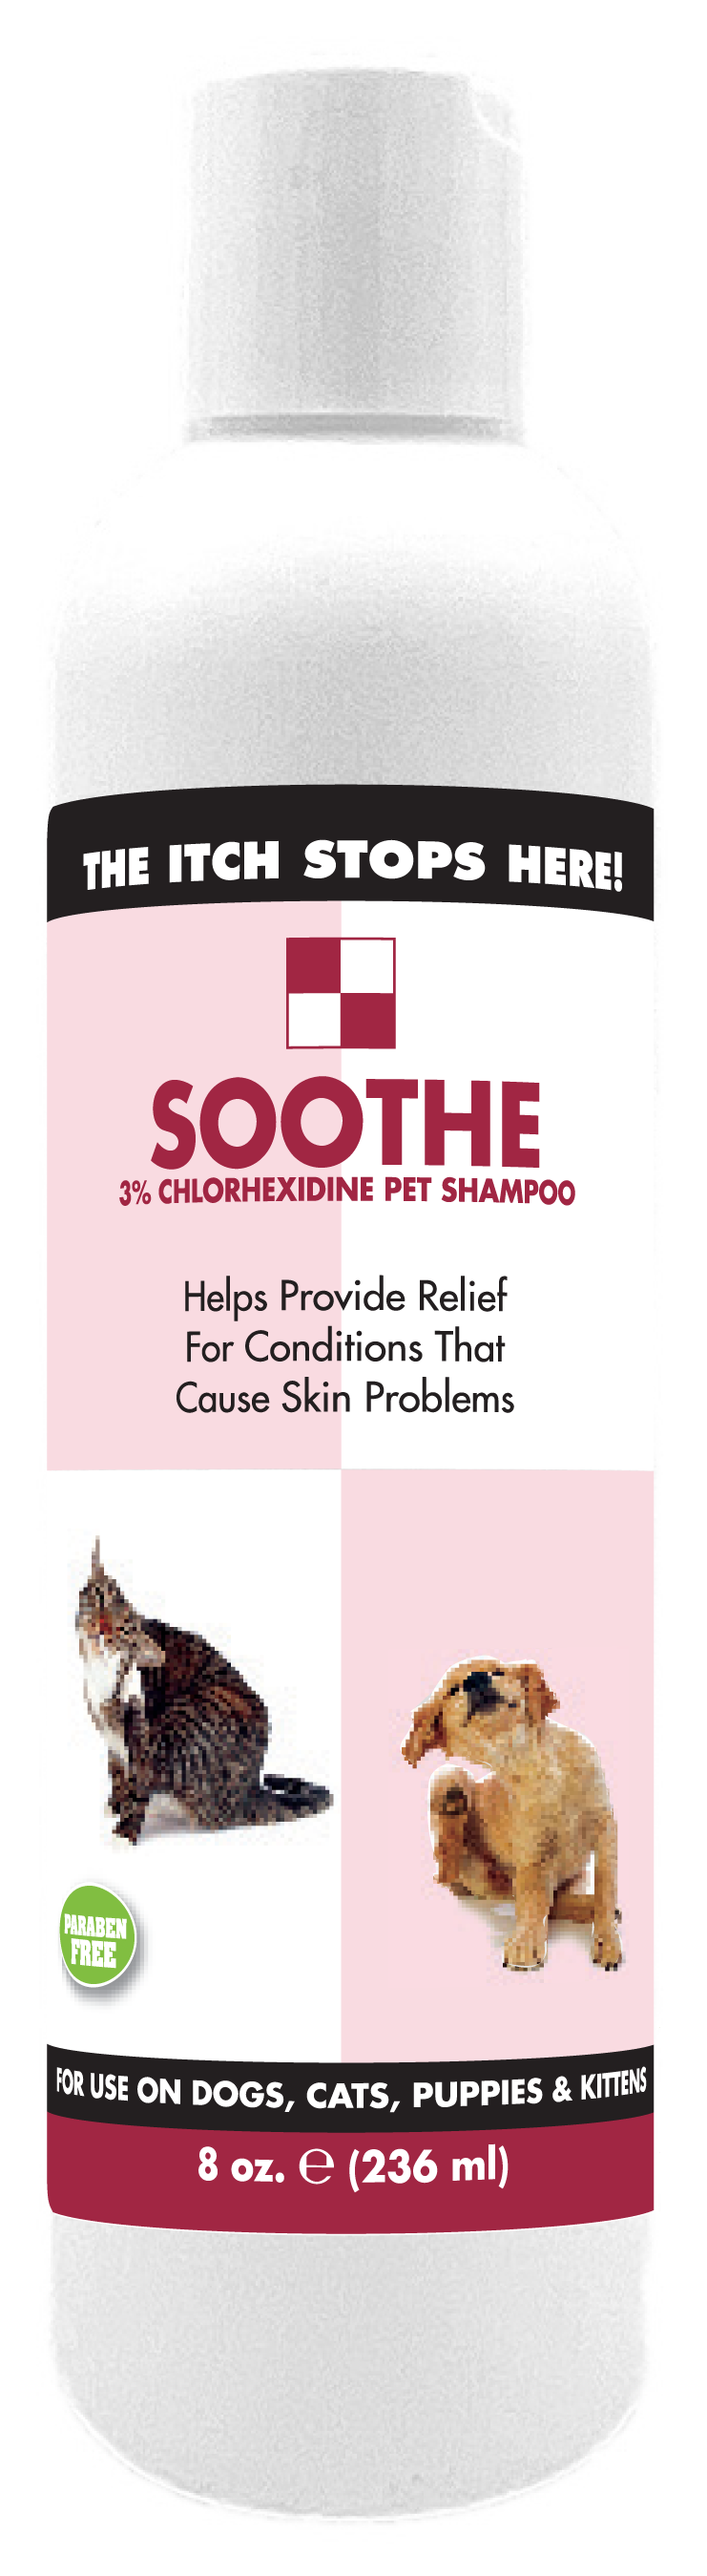 Soothe™ MEDICATED Pet Shampoo